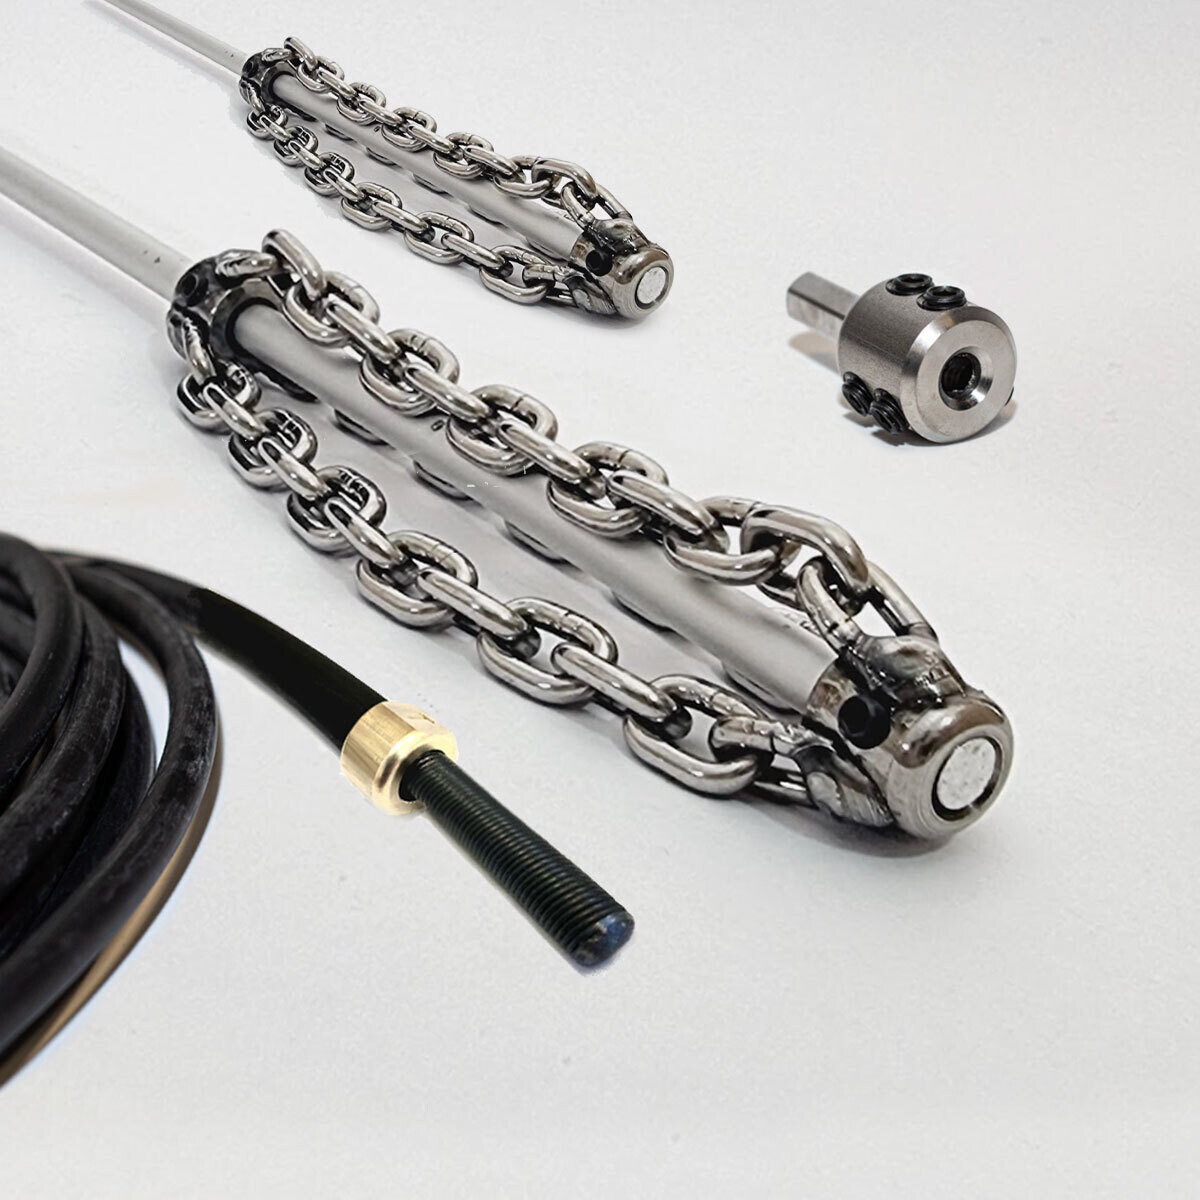 Stainless steel chain for dealing with blockages in high rise buildings.